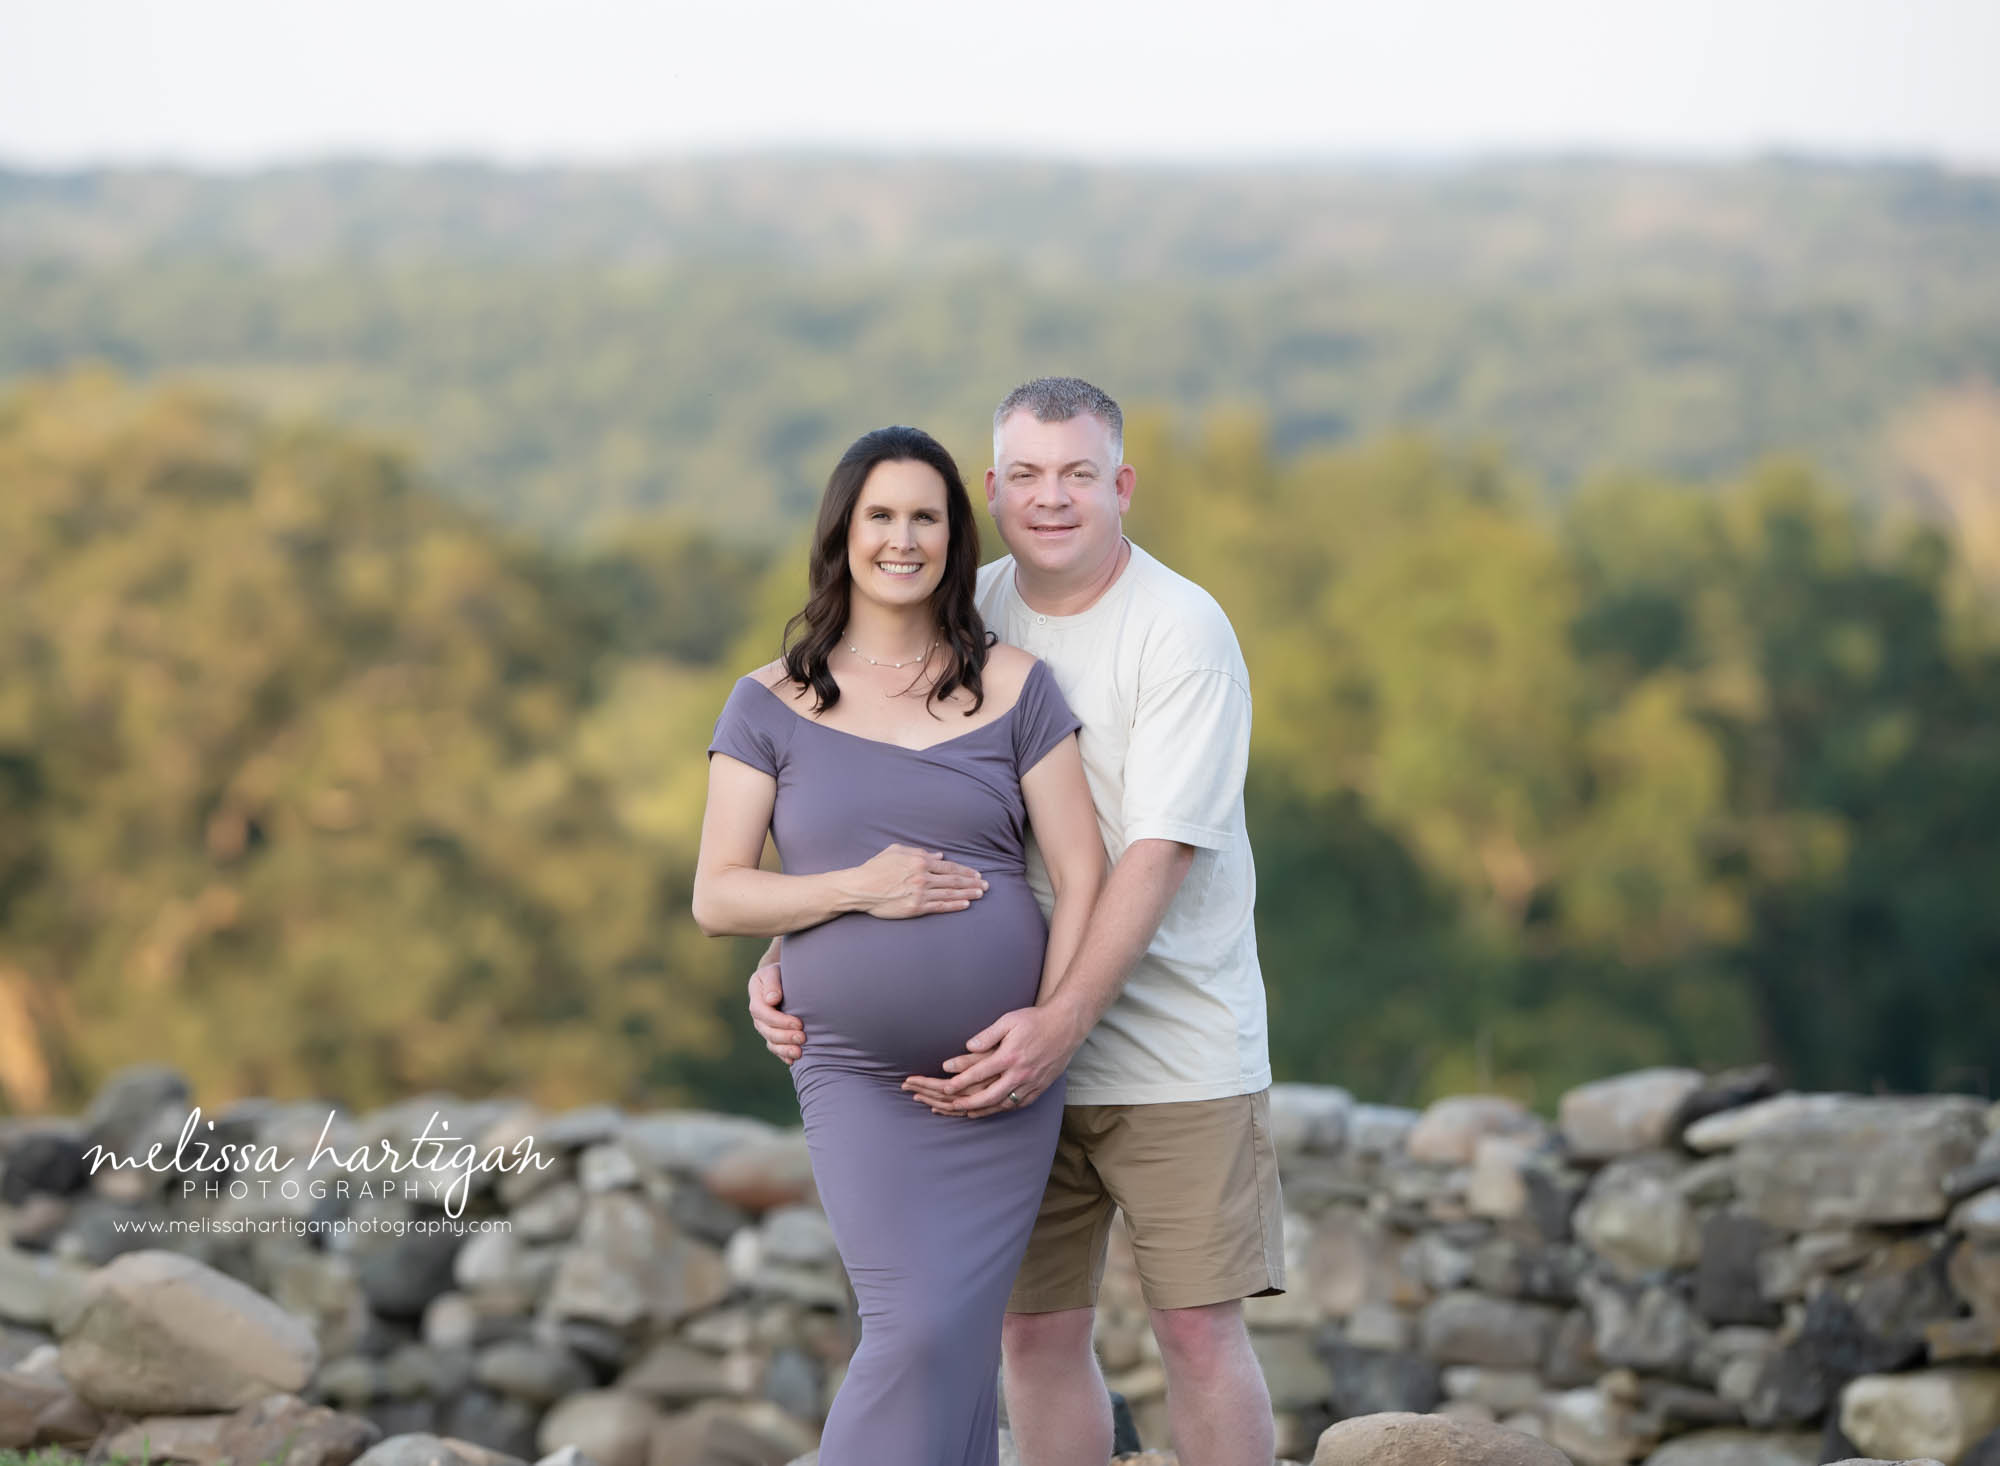 g baby bump couples maternity picture Amston CT maternity photographer